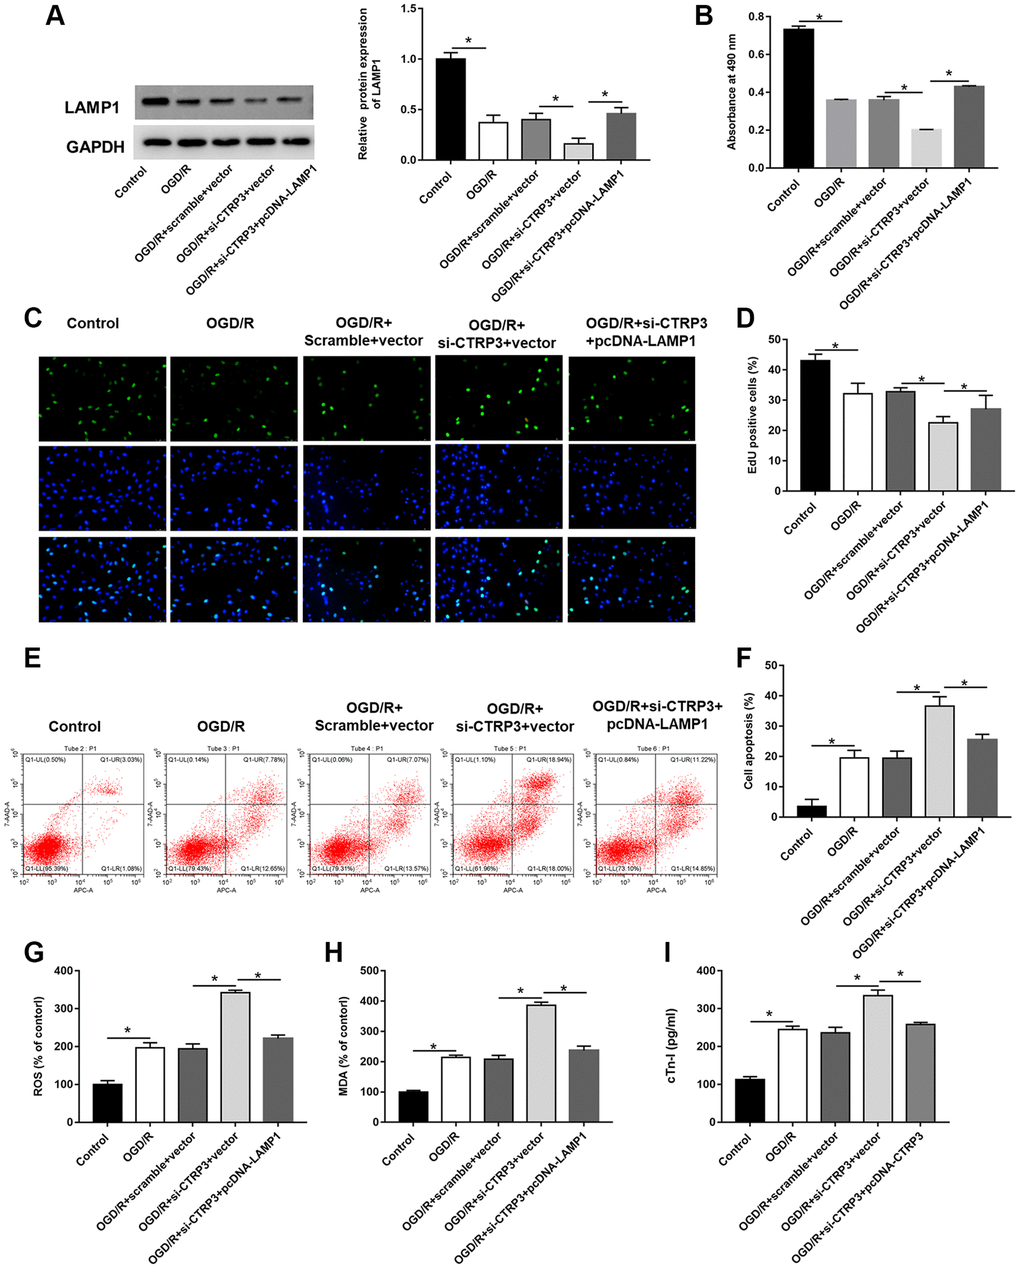 Overexpression of LAMP1 reversed the inhibitory effect of CTRP3 silencing on OGD/R injury in H9C2 cells. H9C2 cells were transfected with CTRP3 siRNA alone or together with pcDNA-LAMP1 for 24 h and then exposed to OGD/R injury. (A) The protein expression of LAMP1 was examined with Western blotting. (B–D) Cell proliferation was detected by using MTT and EdU assays. (E, F) Cell apoptosis ratio was measured by using flow cytometry. (G–I) The production of ROS, MDA and cTn-I was determined.